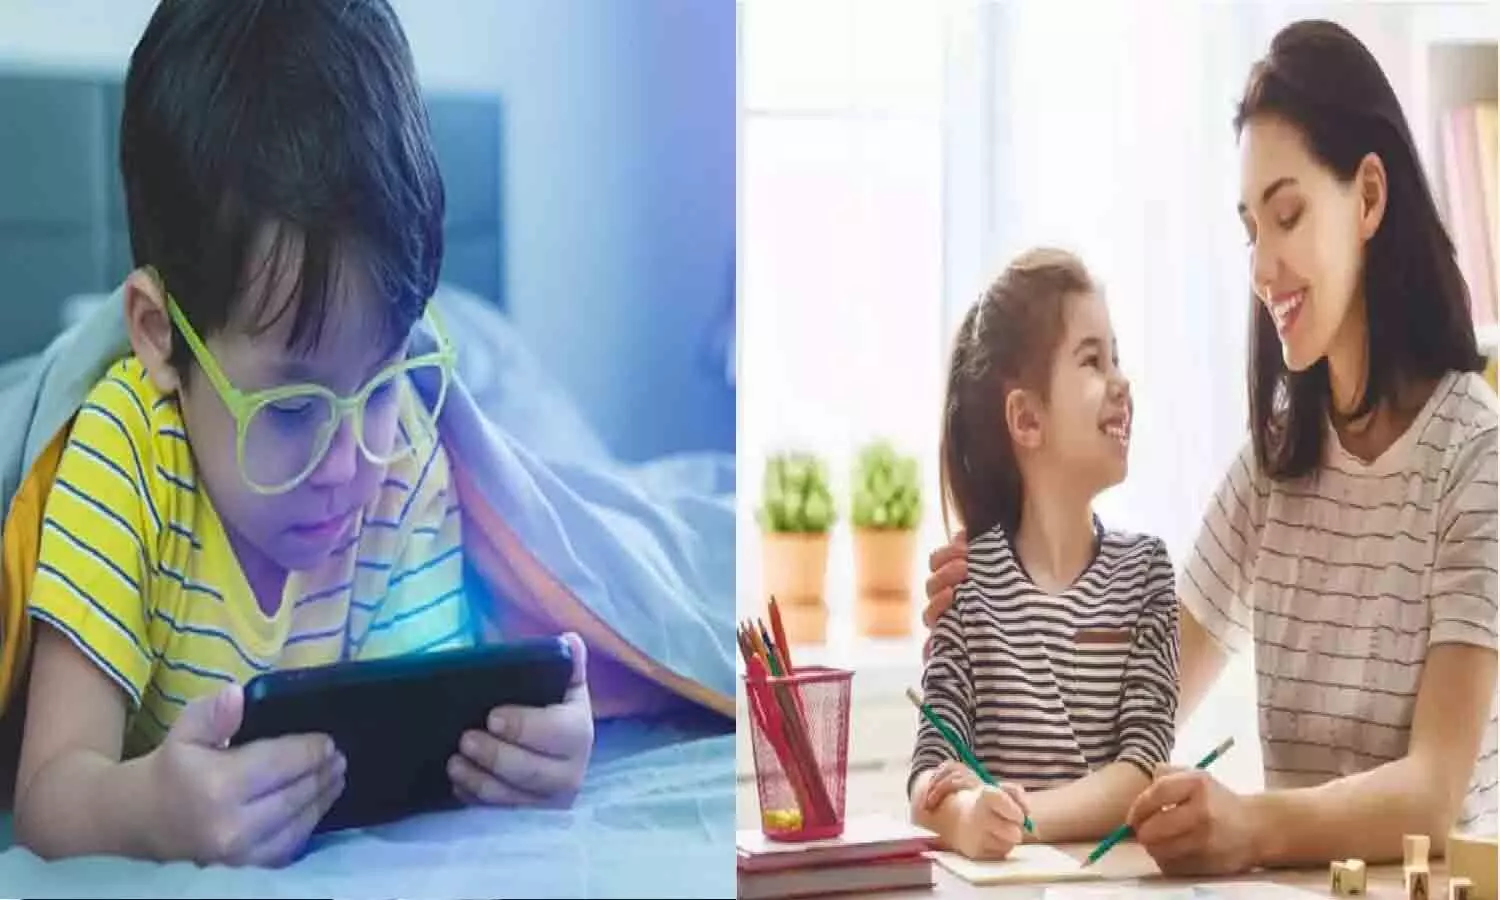 Child Health: Keep children away from mobile, teach them to live freely